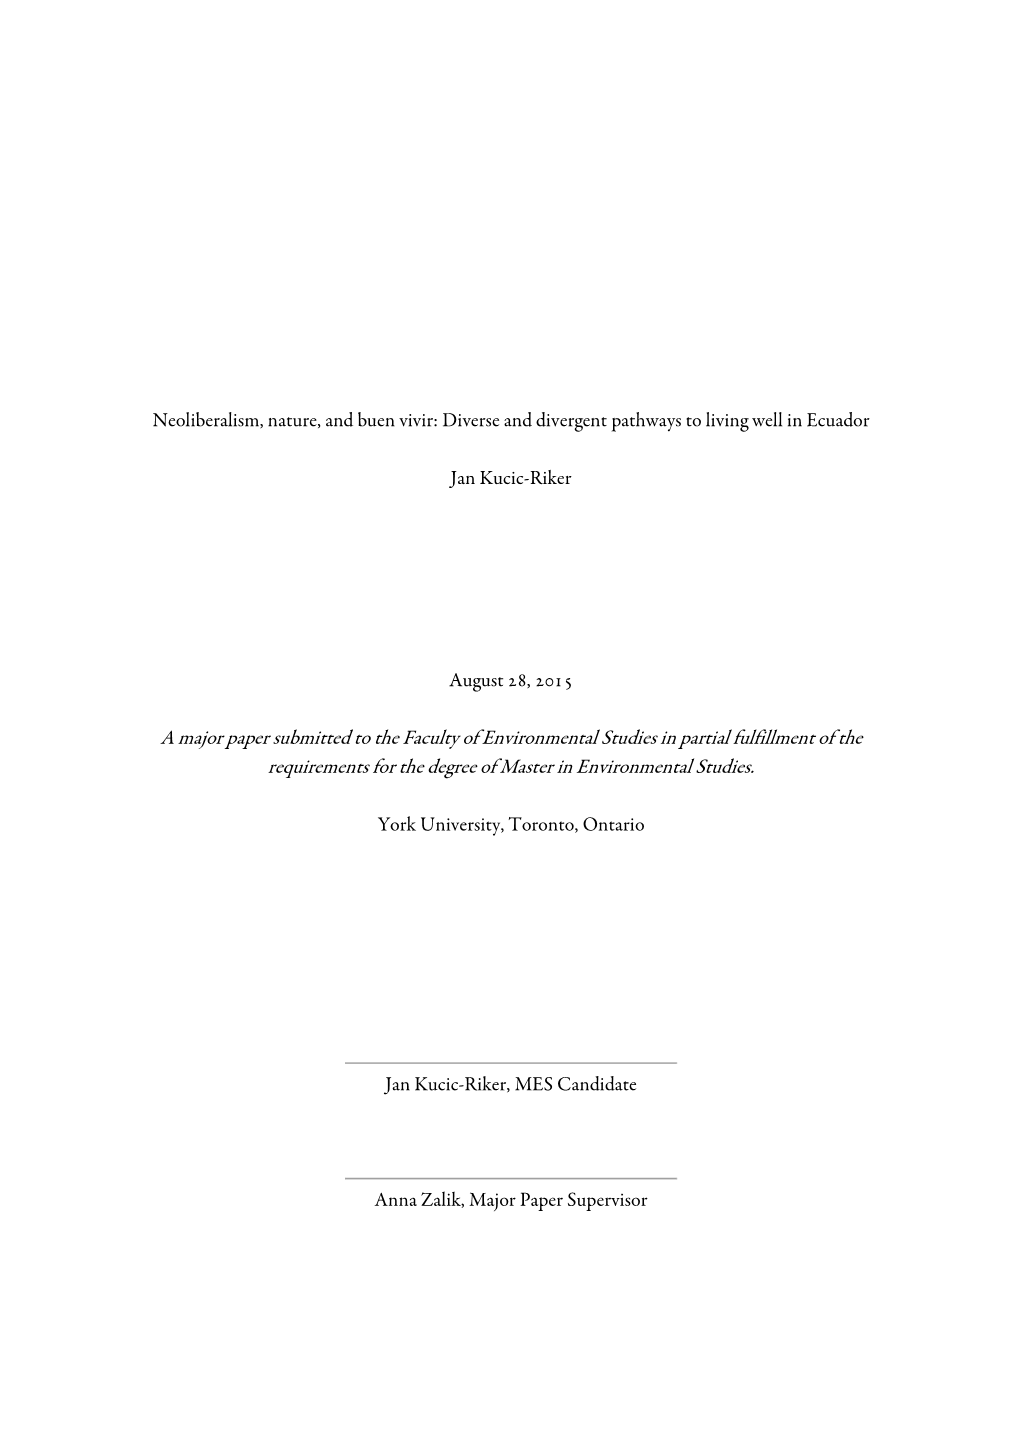 A Major Paper Submitted to the Faculty of Environmental Studies in Partial Fulfillment of the Requirements for the Degree of Master in Environmental Studies